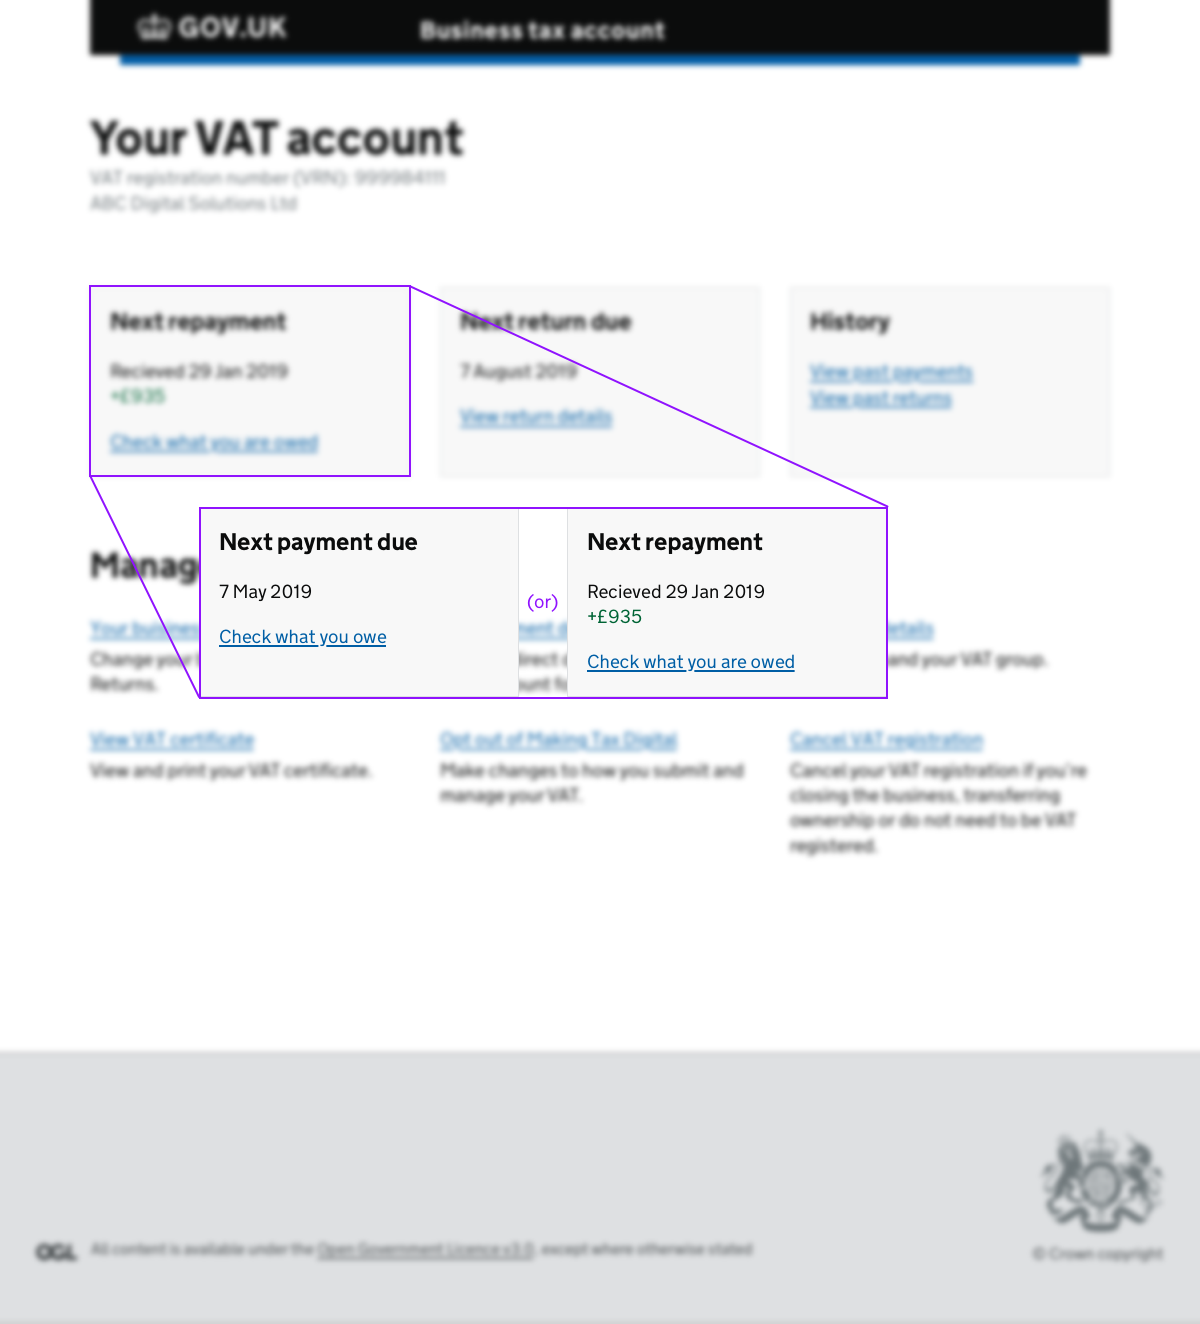 A screenshot showing where we could have added VAT repayment information into the existing VAT account